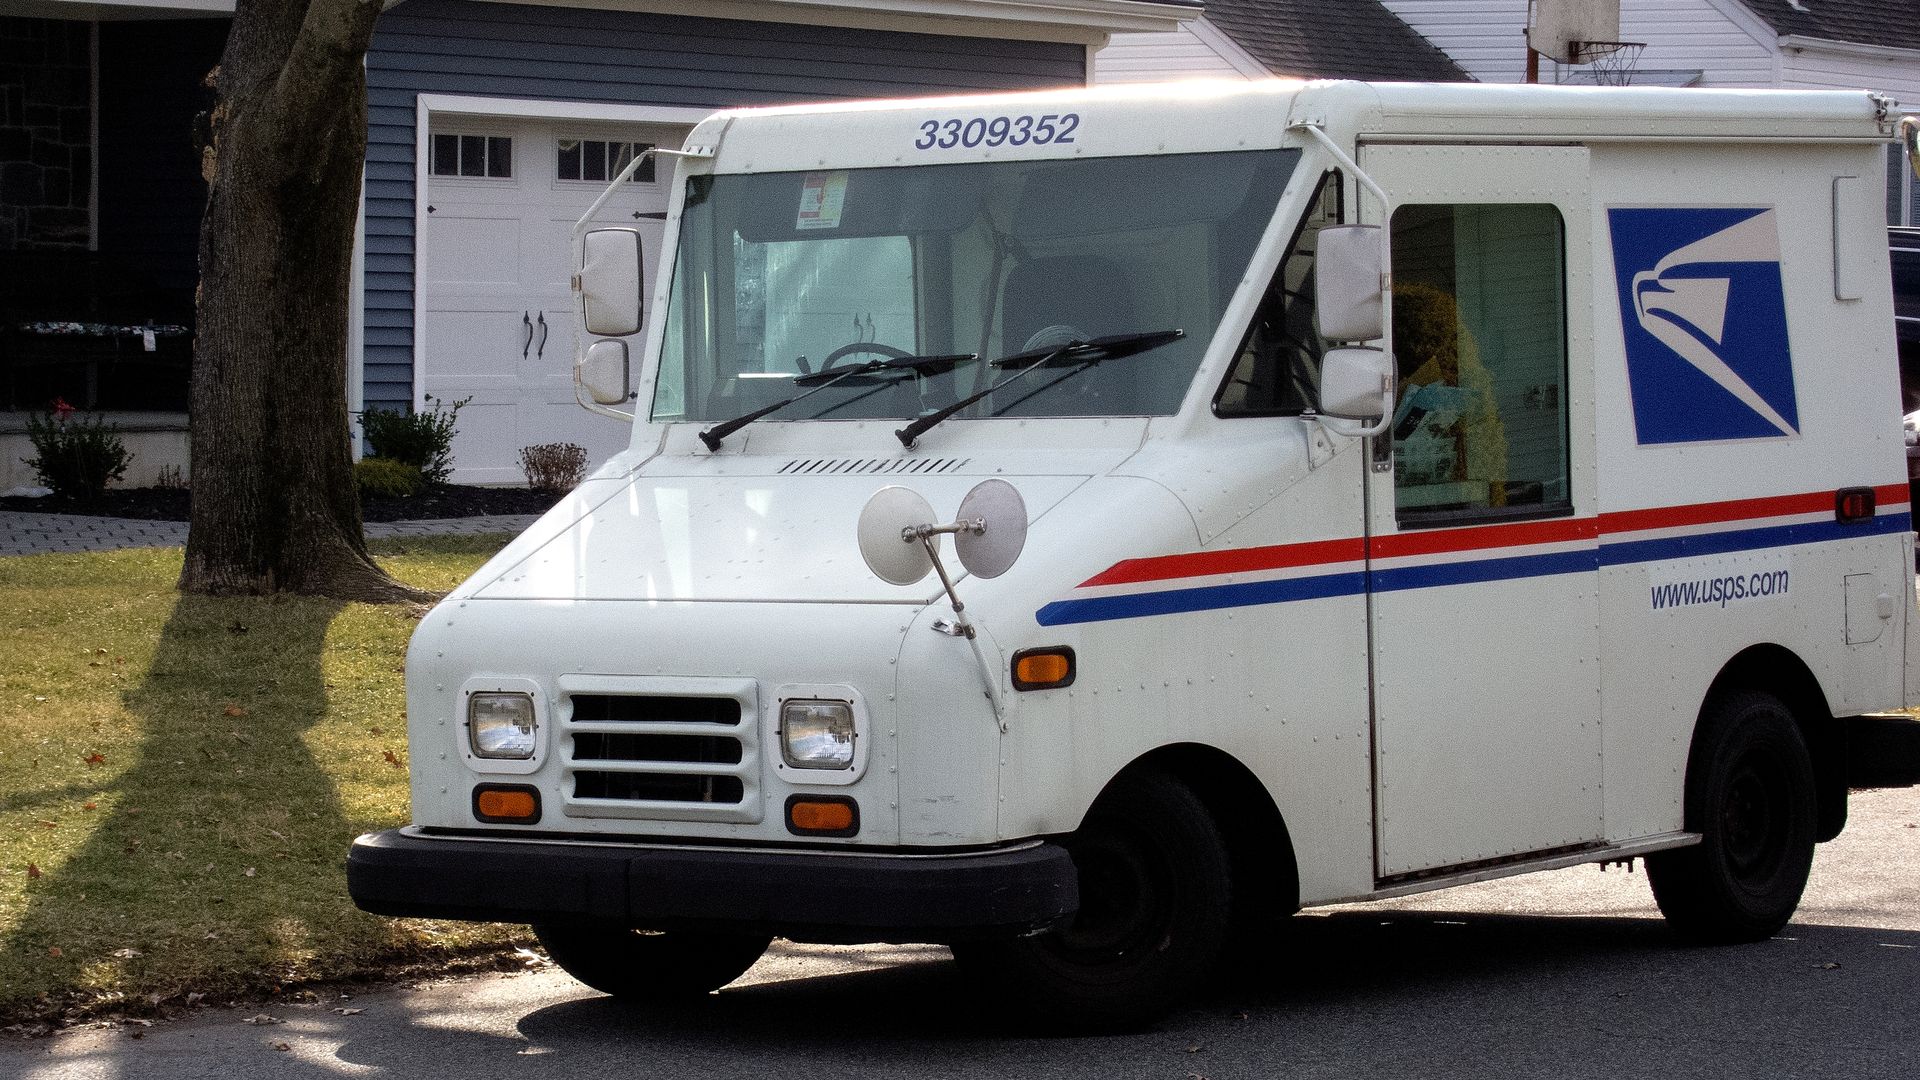 A mail truck parked on a street